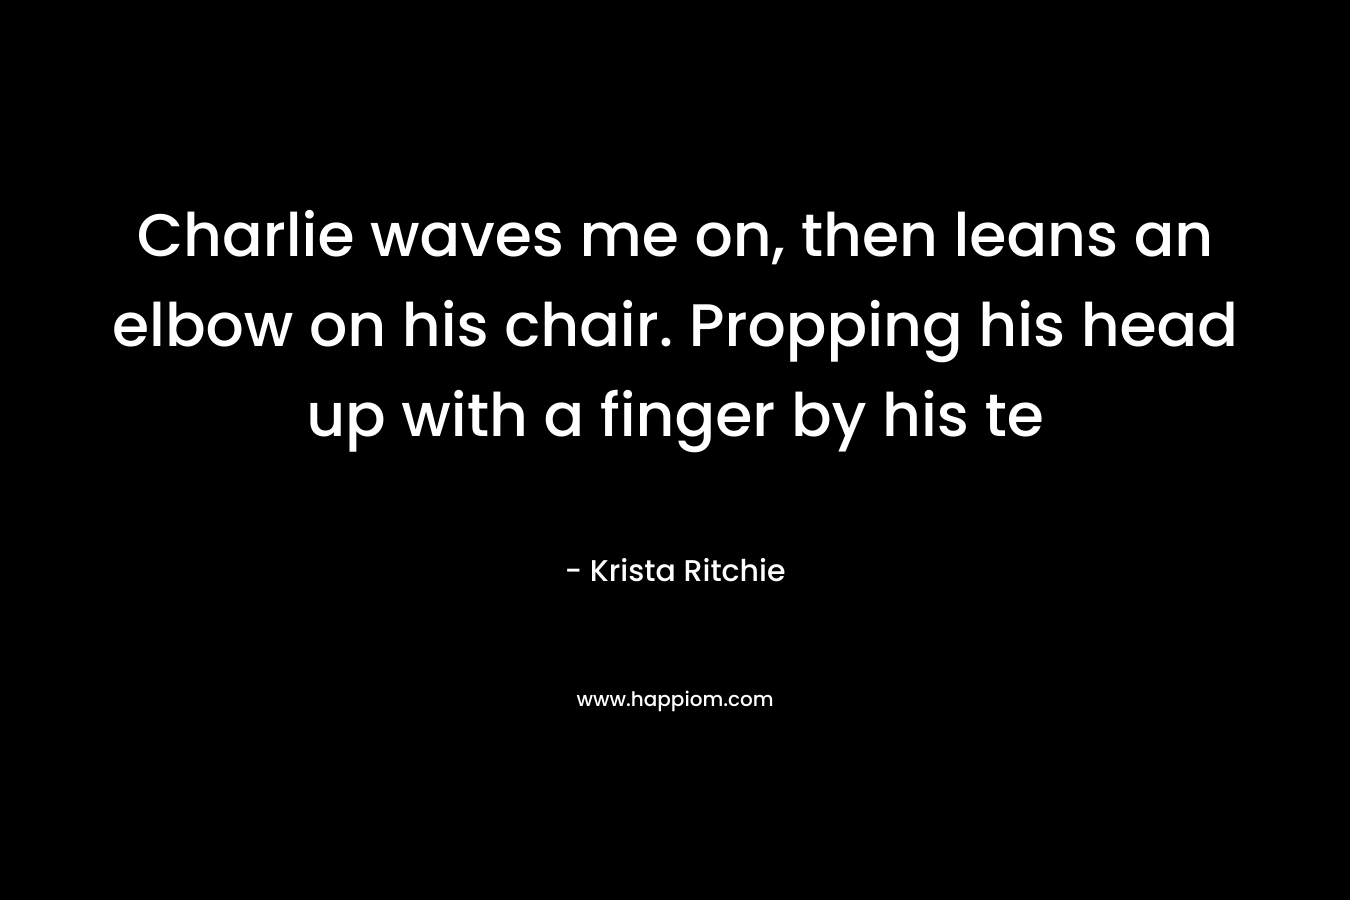 Charlie waves me on, then leans an elbow on his chair. Propping his head up with a finger by his te – Krista Ritchie